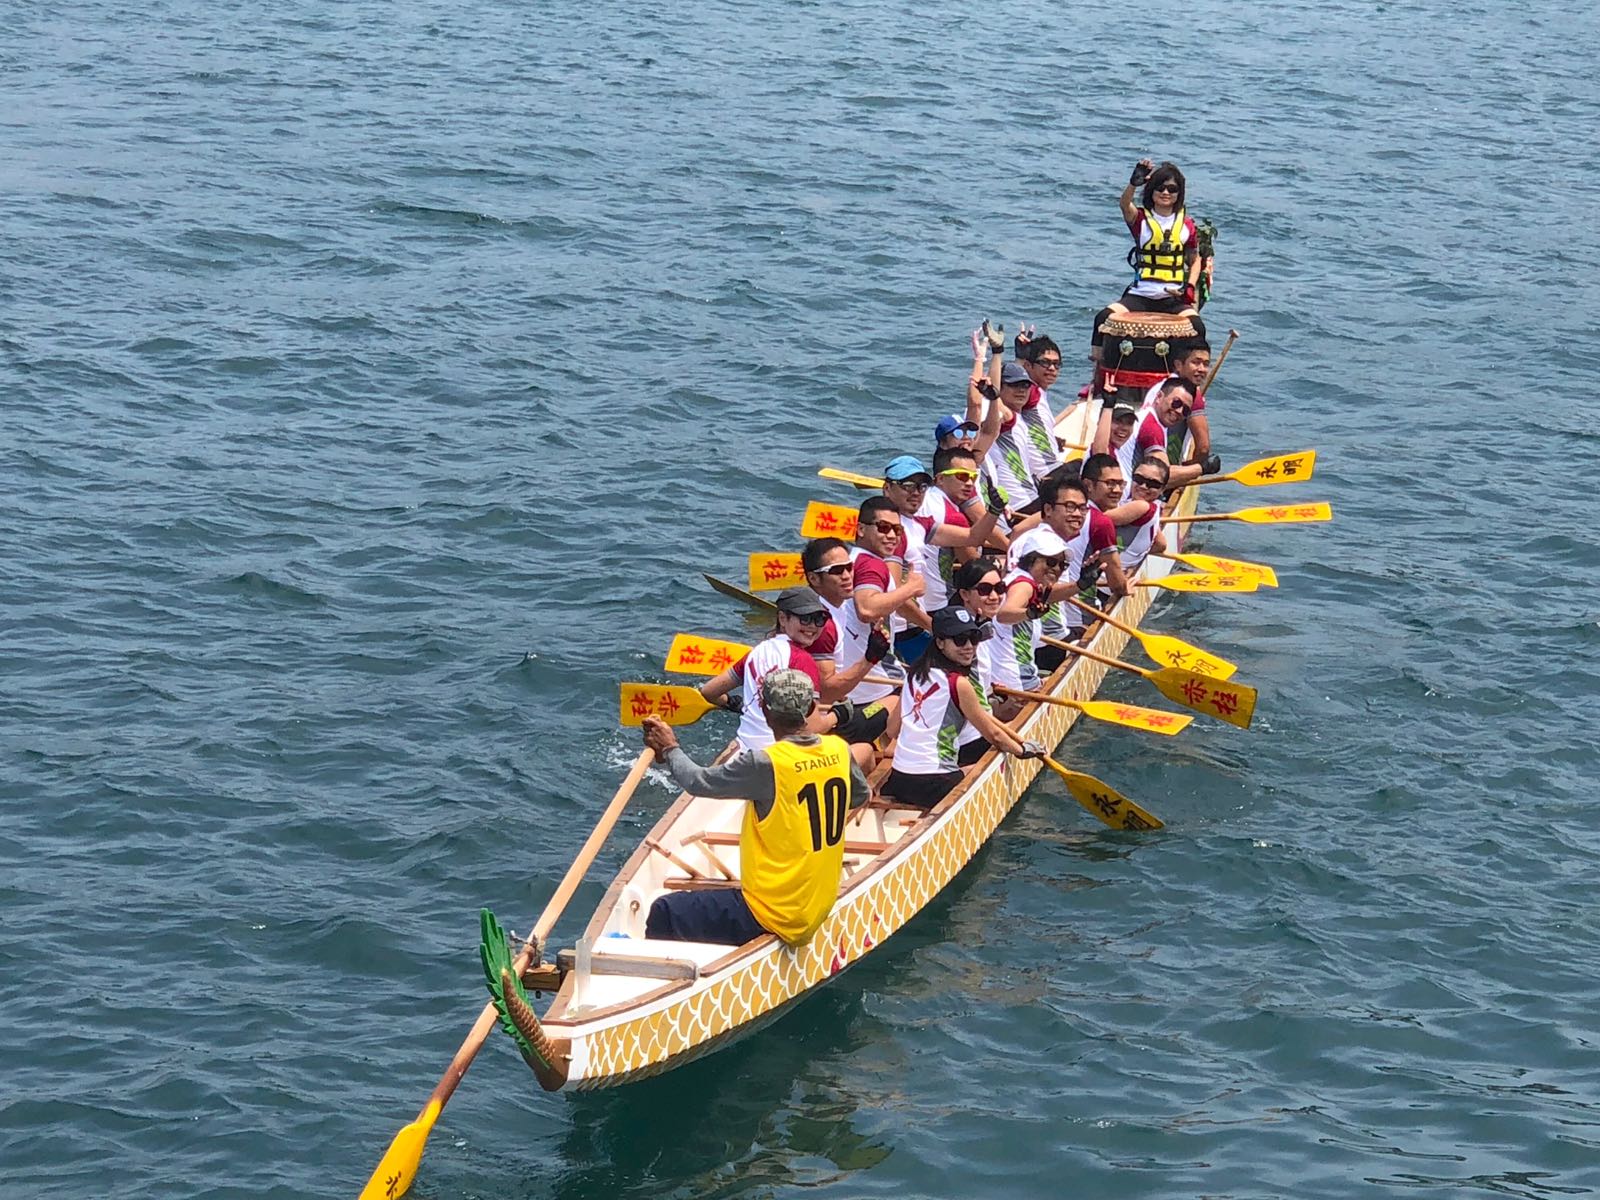 ONC Lawyers achieved excellent results in the Sun Life Stanley International Dragon Boat Championships 2018